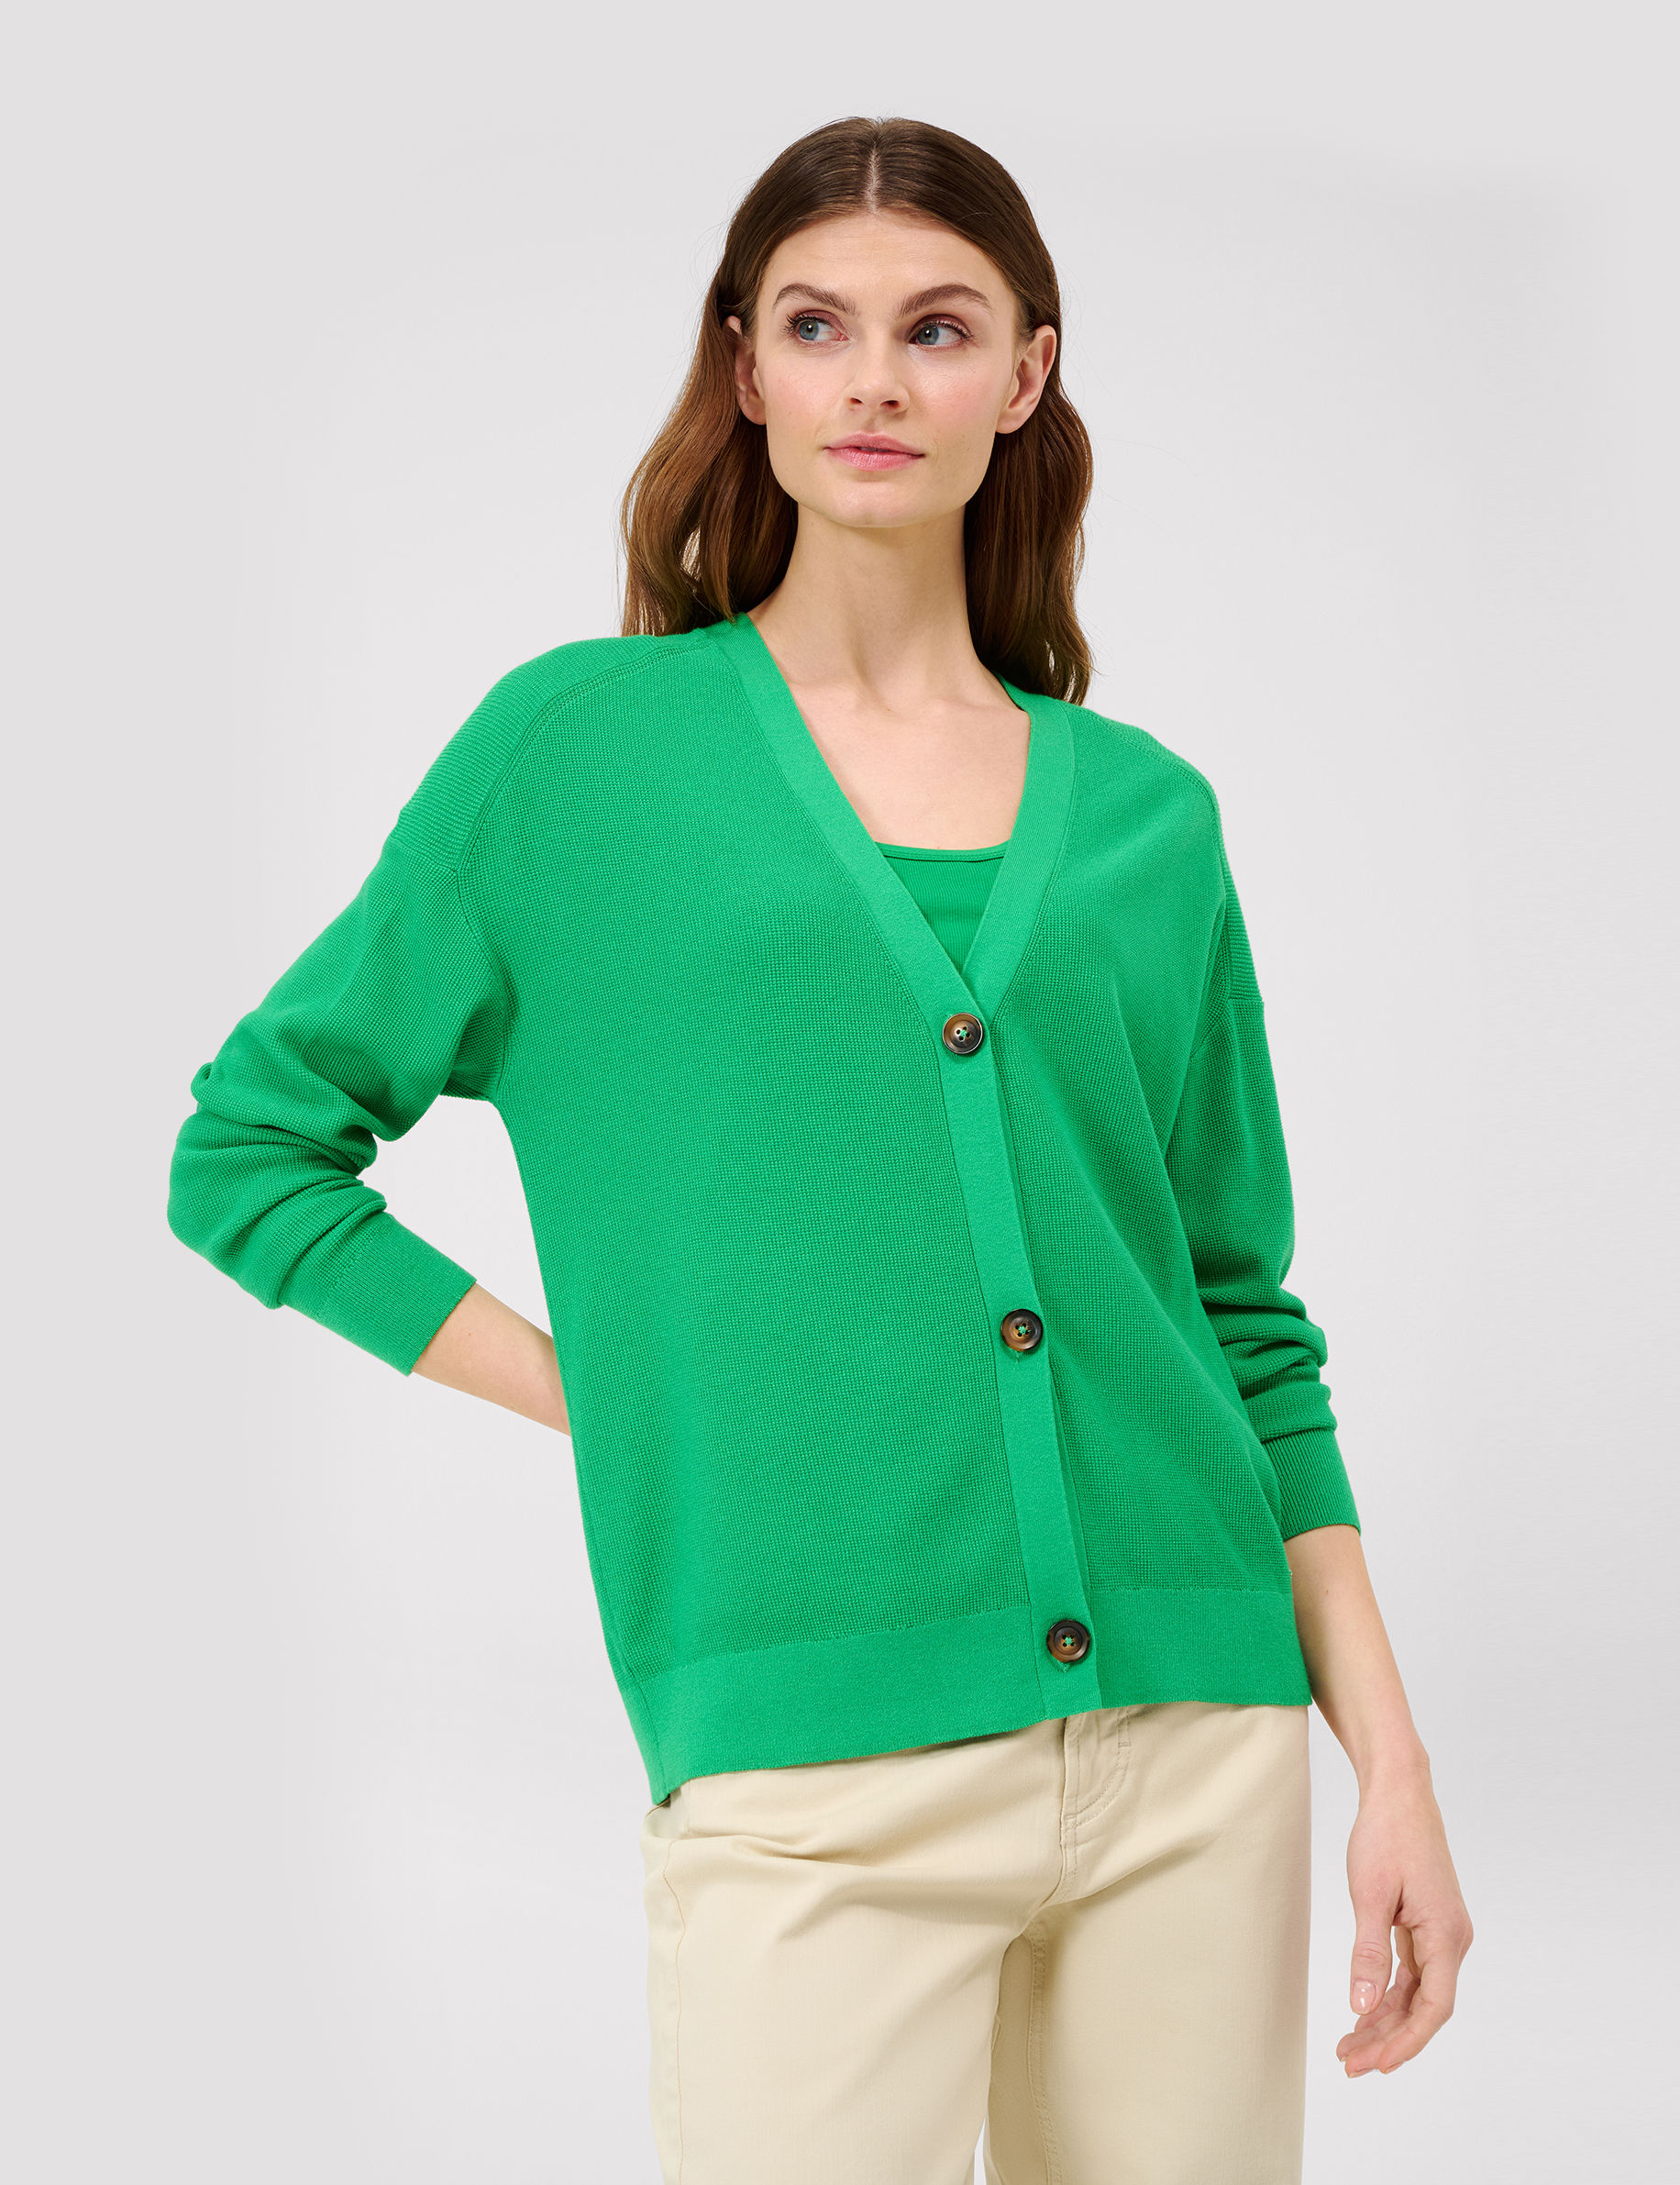 Shades of green, Women, Style ALICIA, MODEL_FRONT_ISHOP